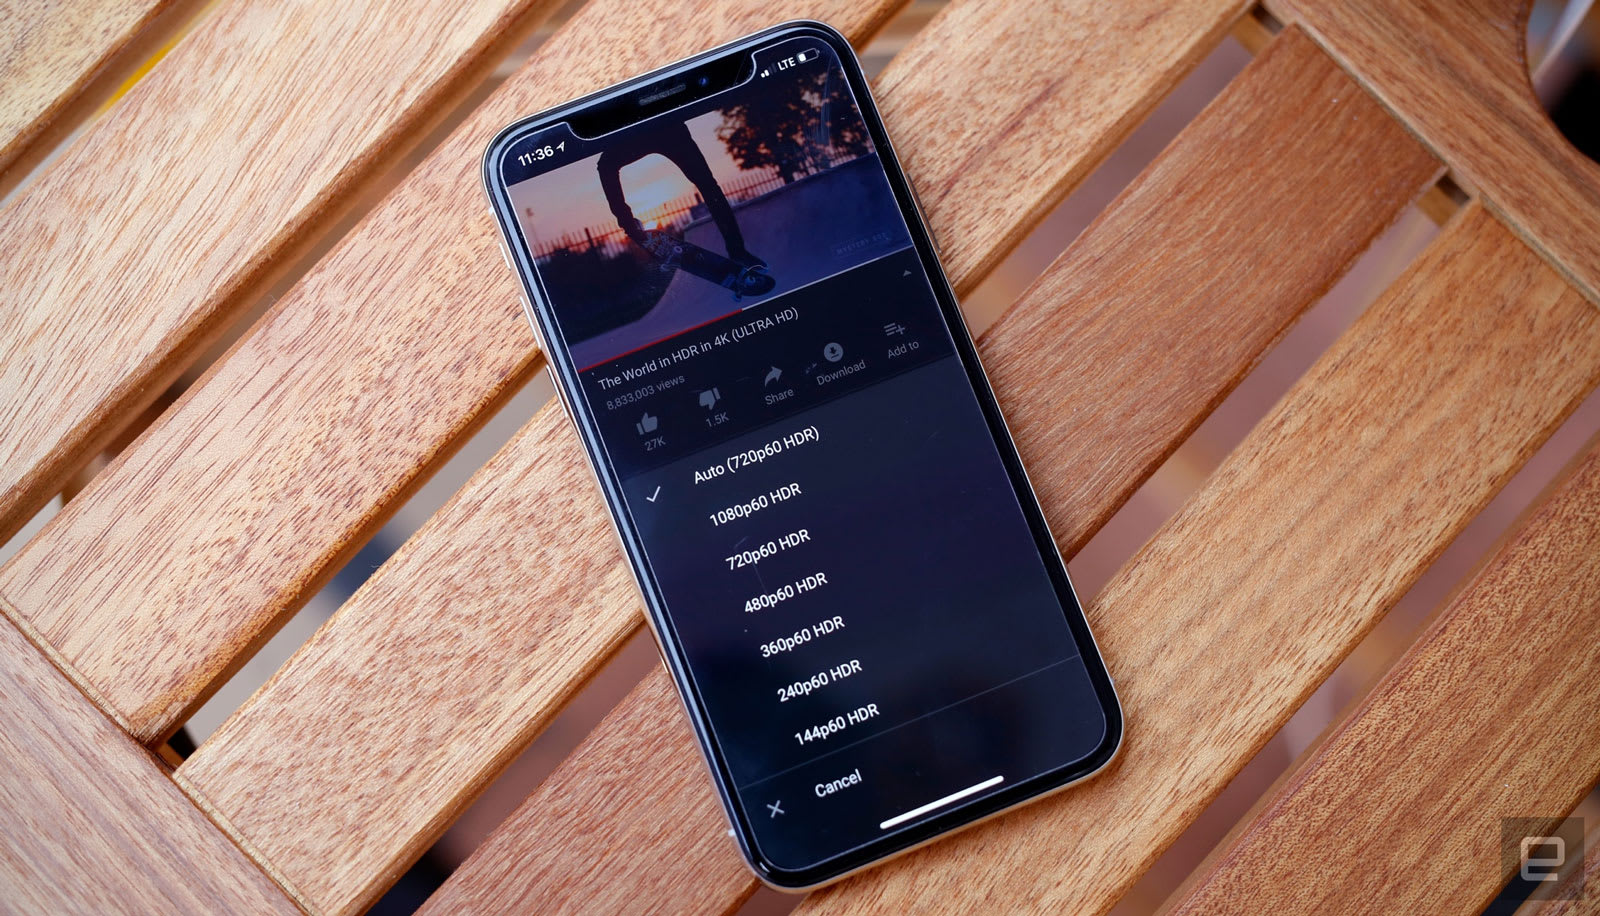 iPhone X is the latest device to stream YouTube HDR video1600 x 916